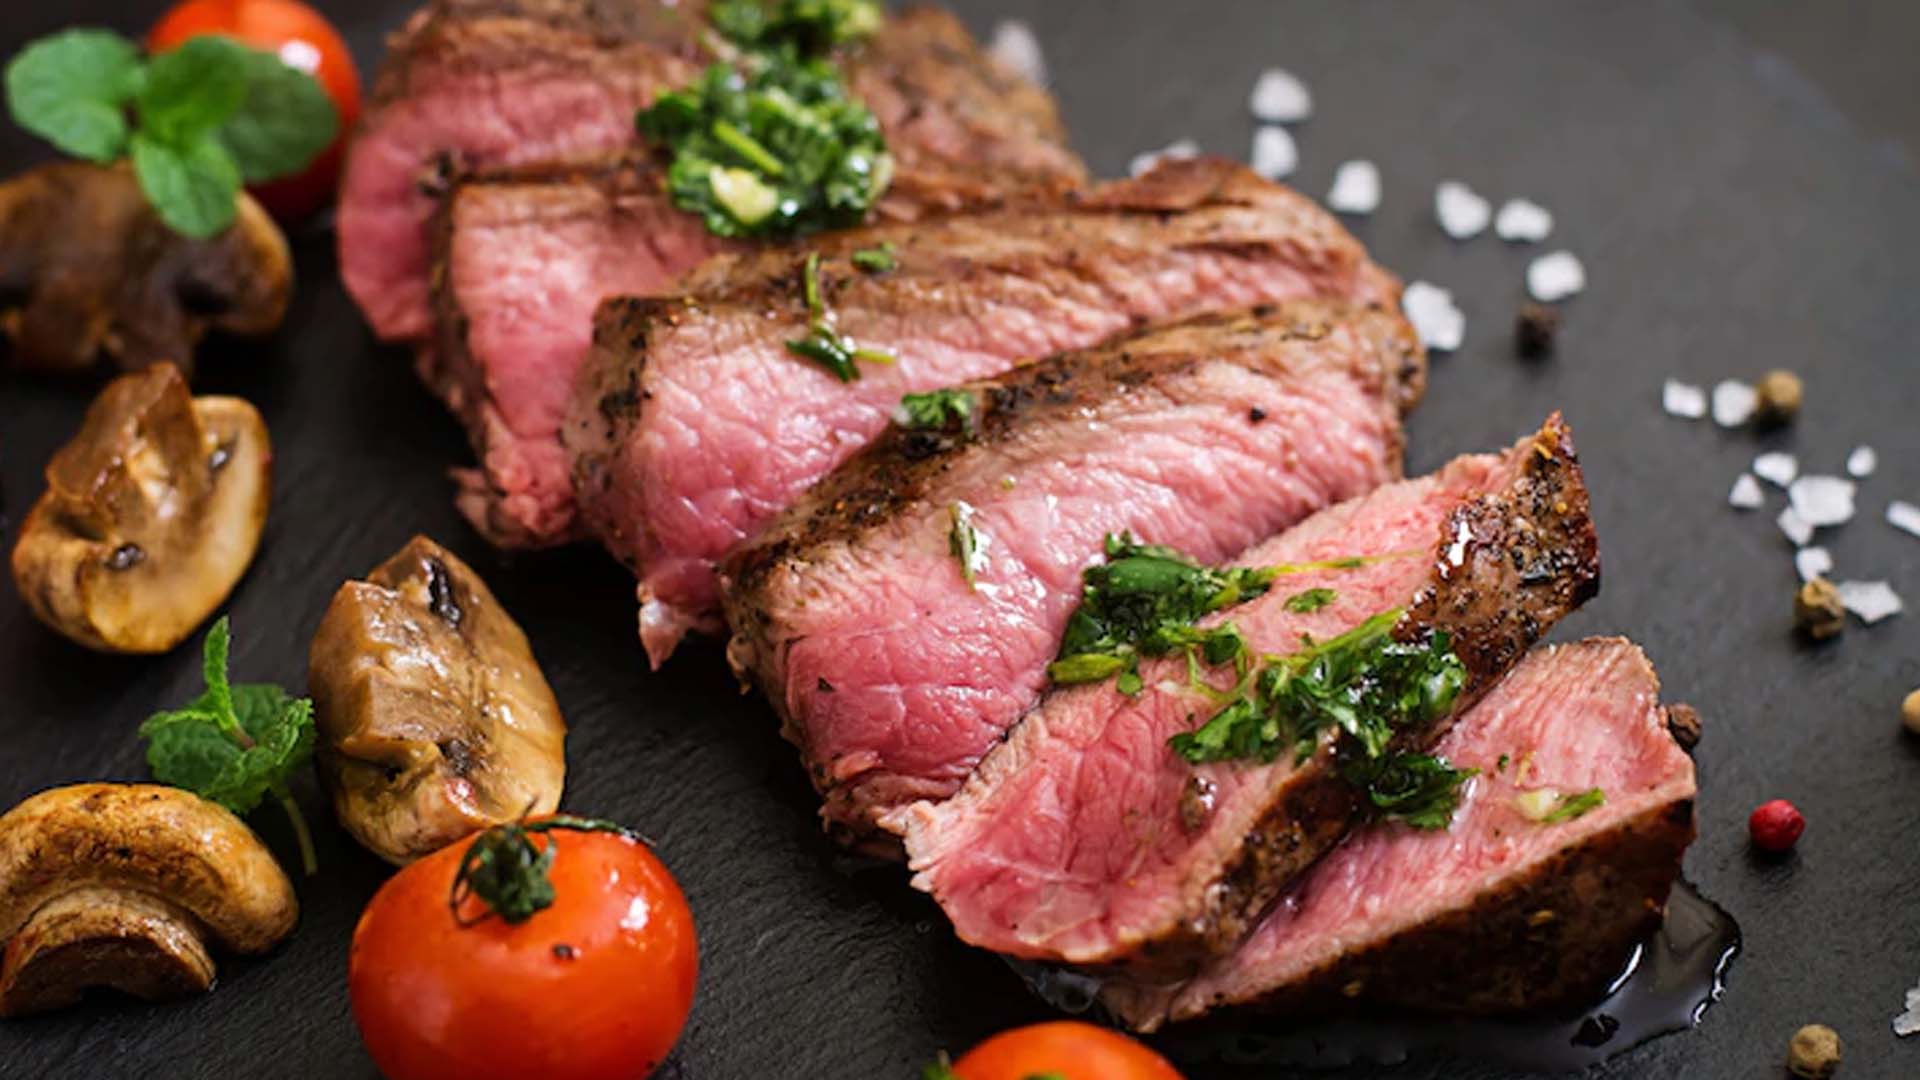 Beef: Nutrition Facts and Health Benefits